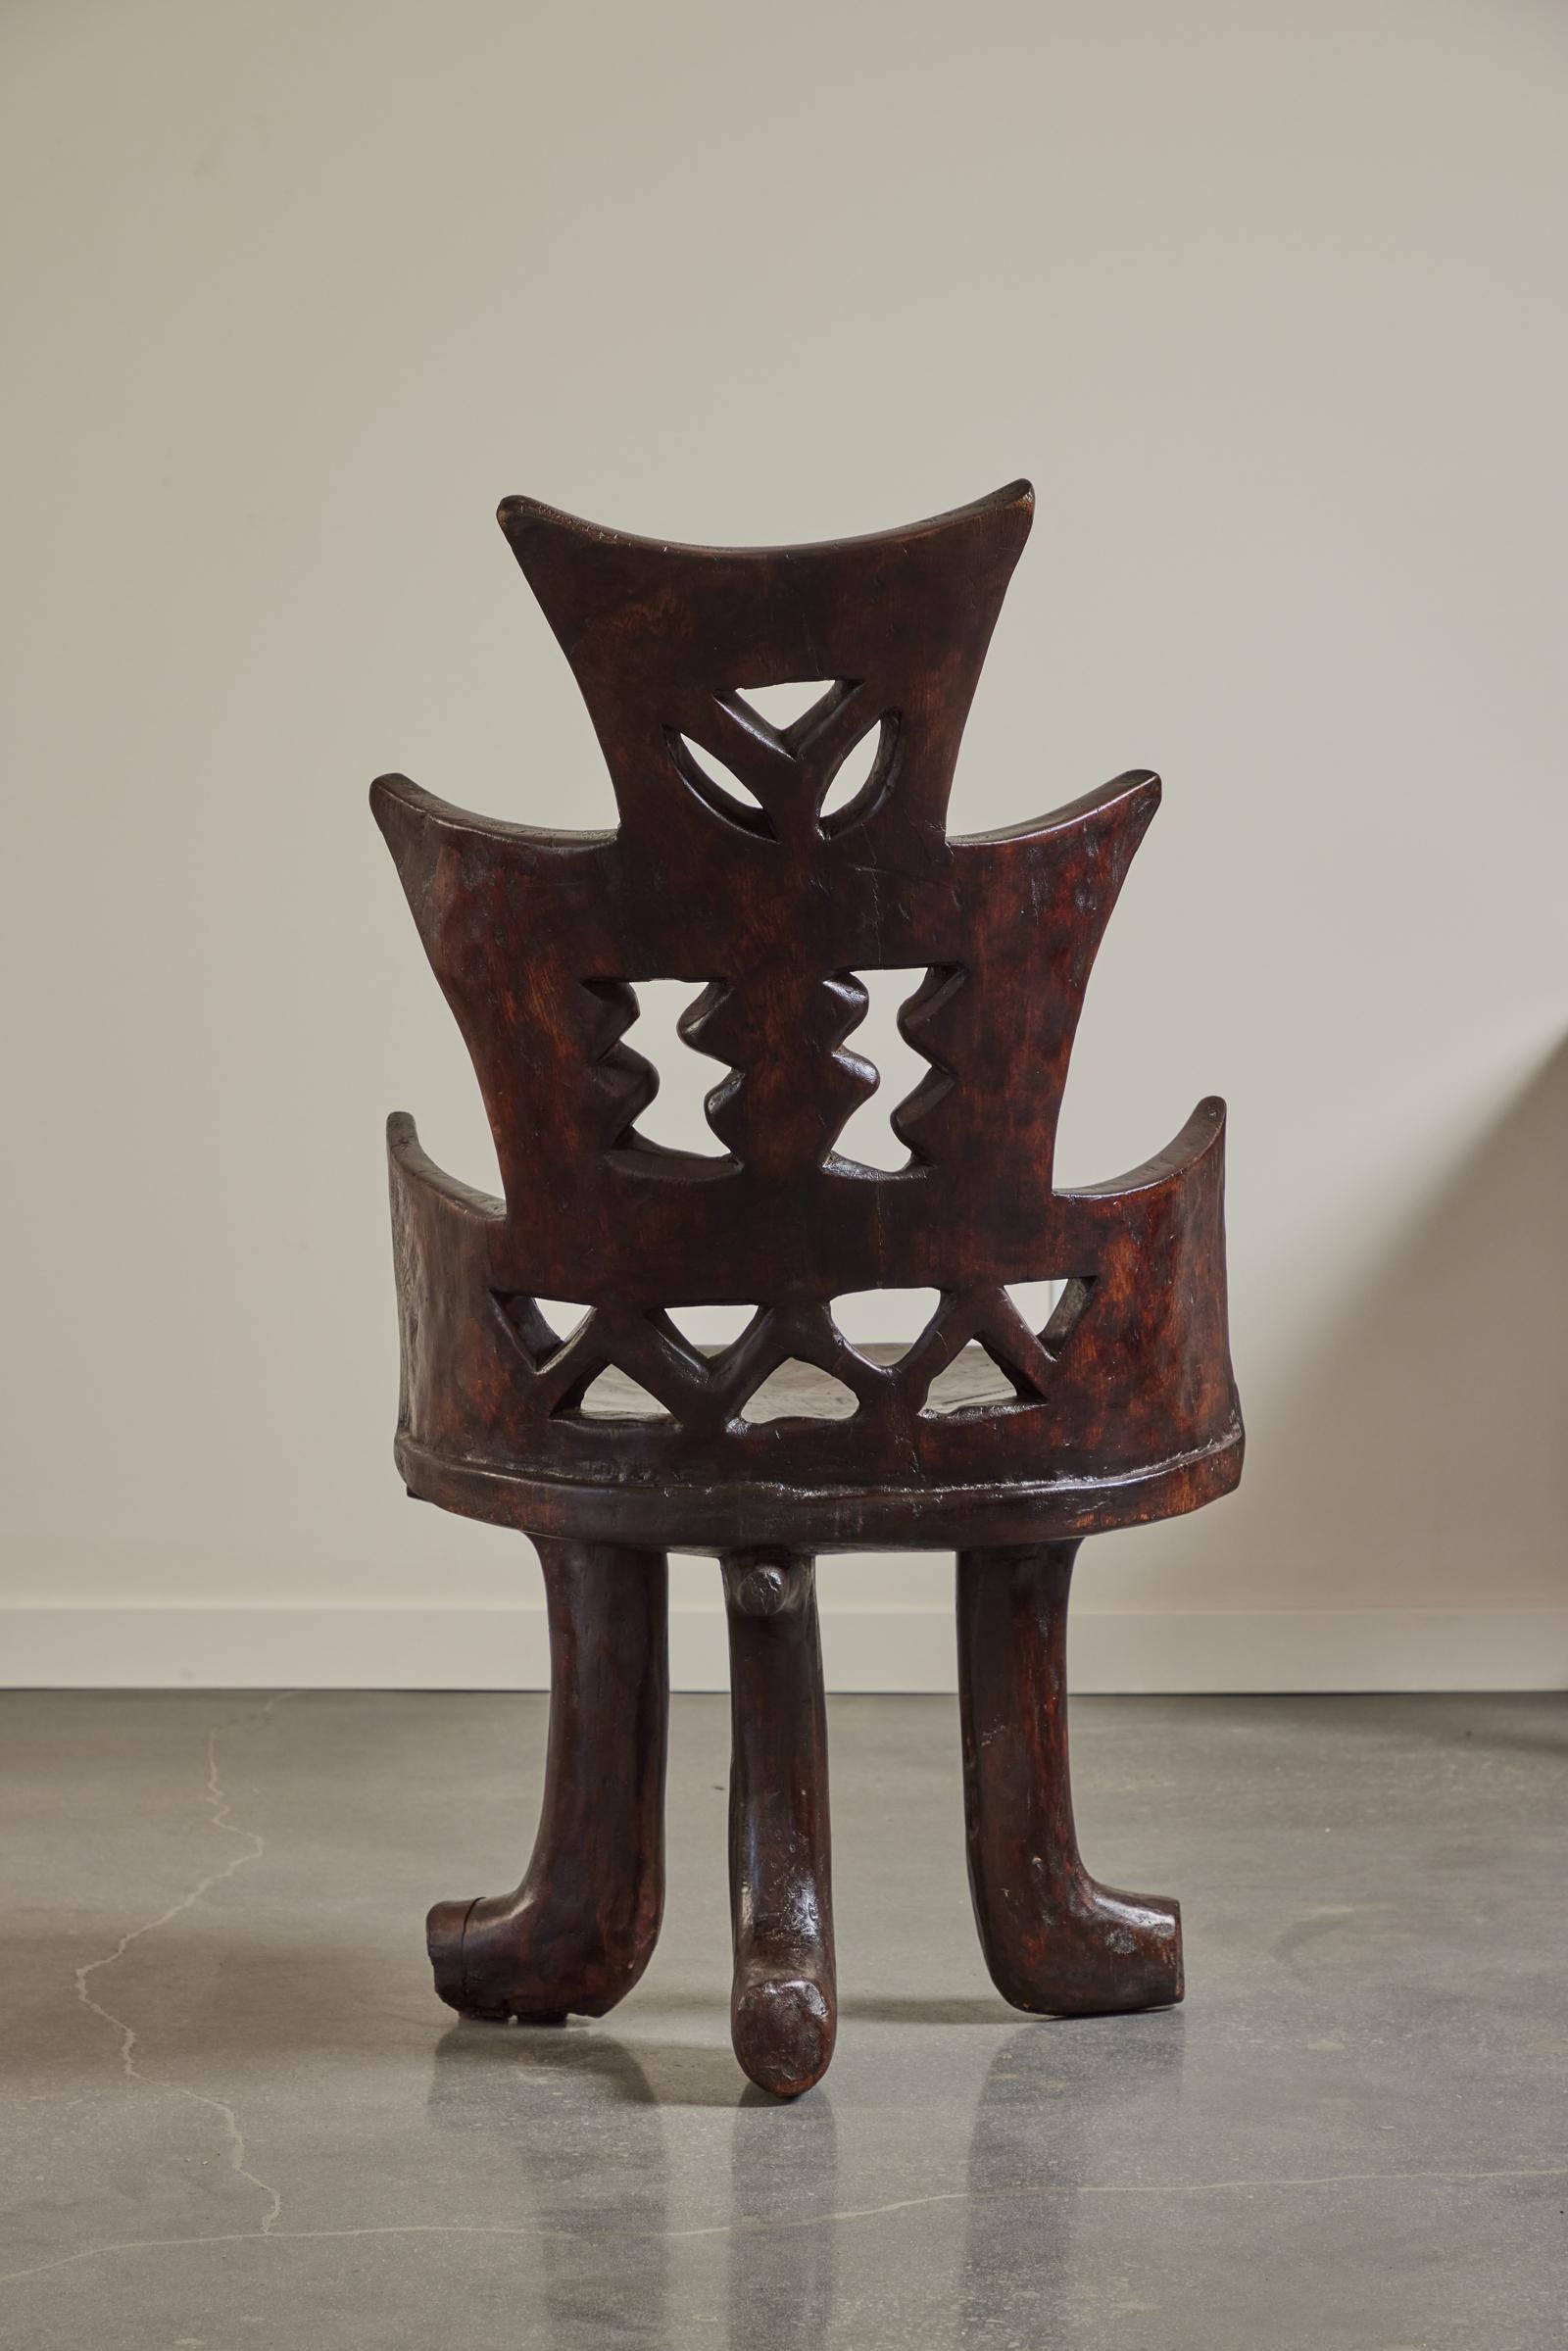 Ethiopian Carved High Back Chair, 20th Century Gurage People, Jimma, Ethiopia